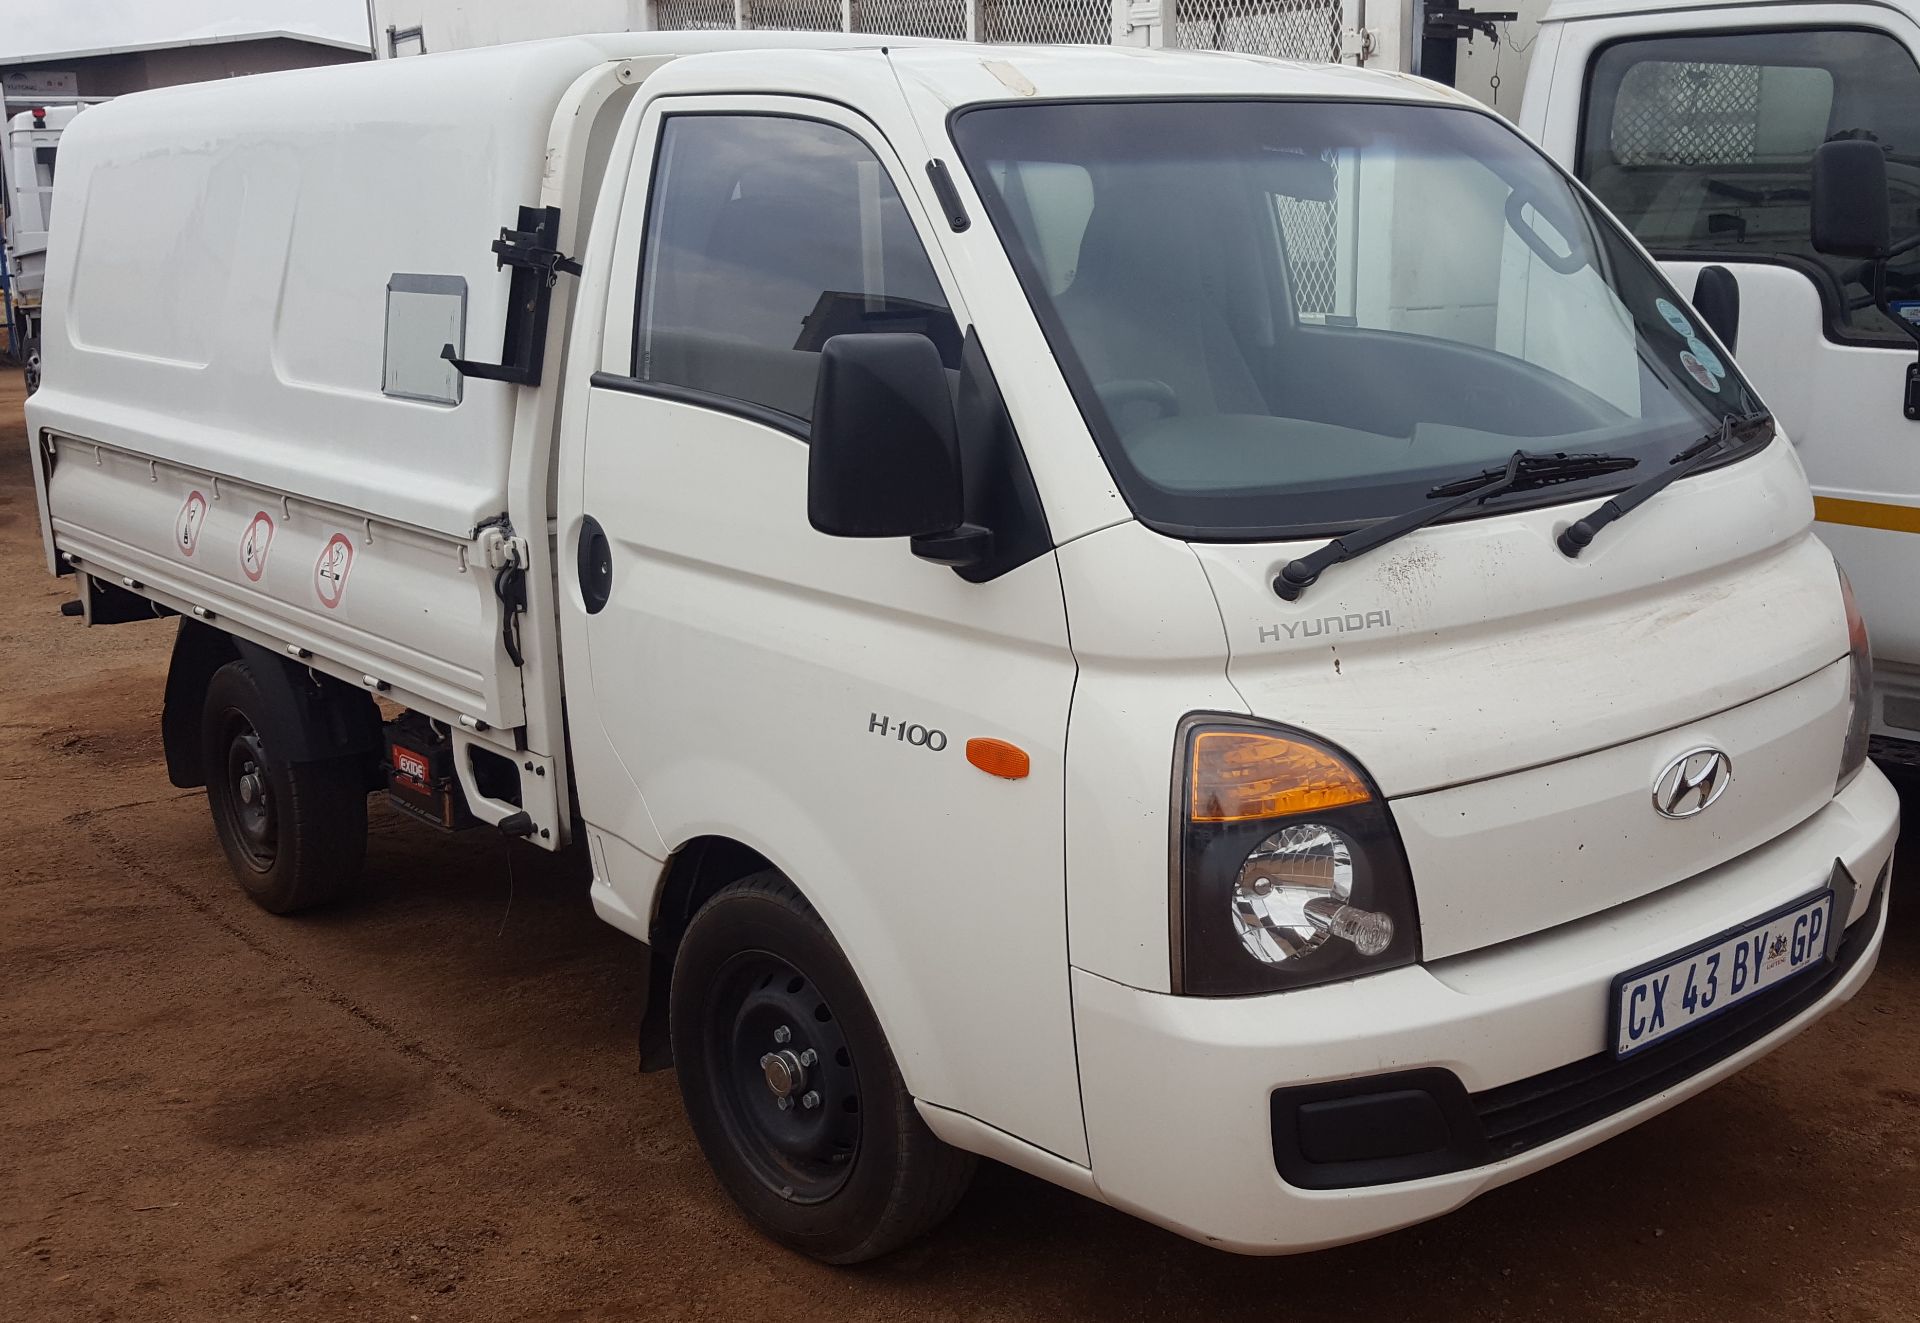 2014 HYUNDAI H100 D/SIDE WITH CANOPY - (CX43BYGP)